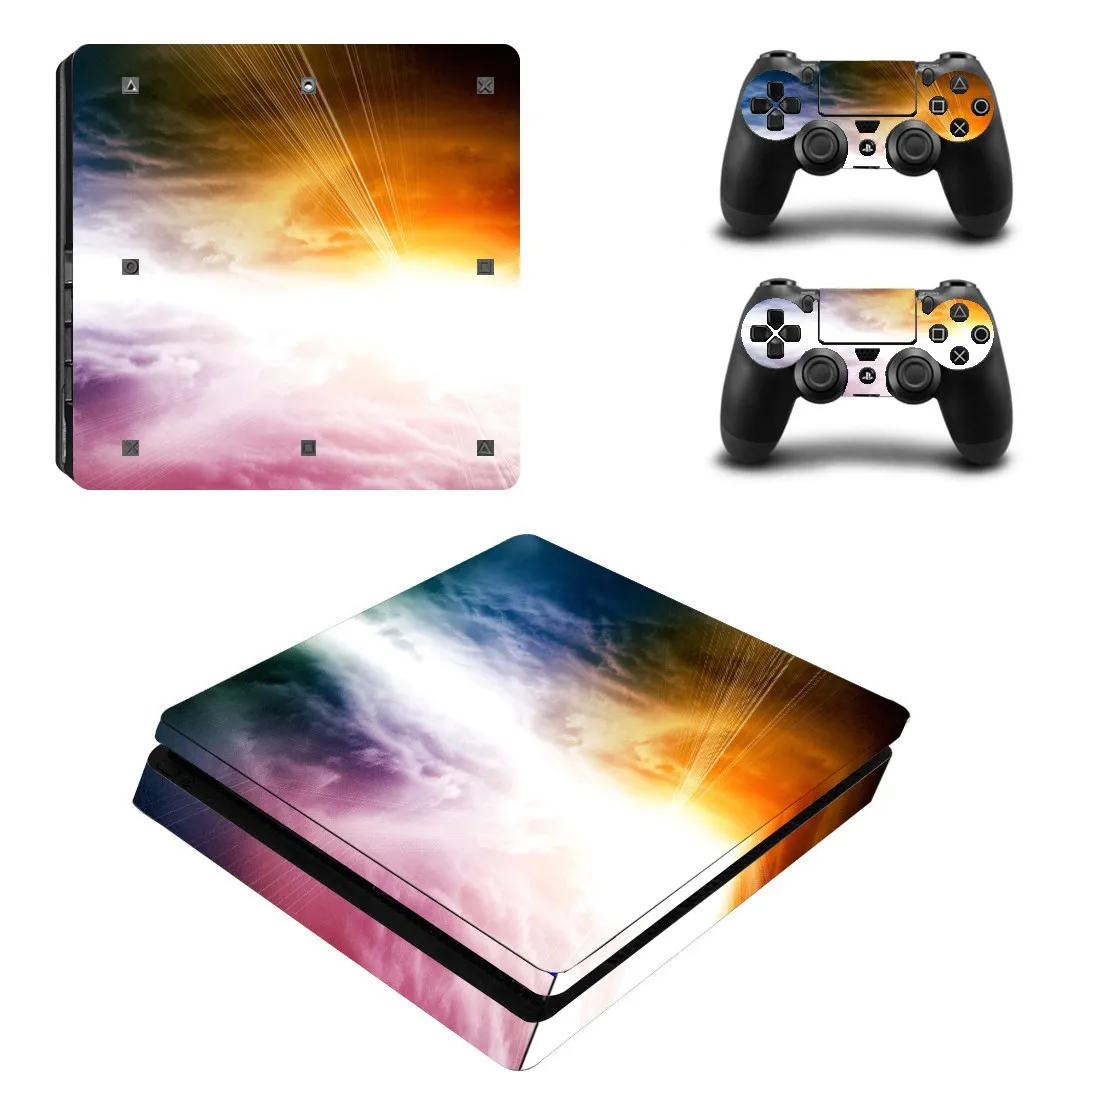 Game The Outer Worlds PS4 Skin Sticker Decal for Sony PlayStation 4 Console  and Controllers Skin PS4 Sticker Vinyl - AliExpress